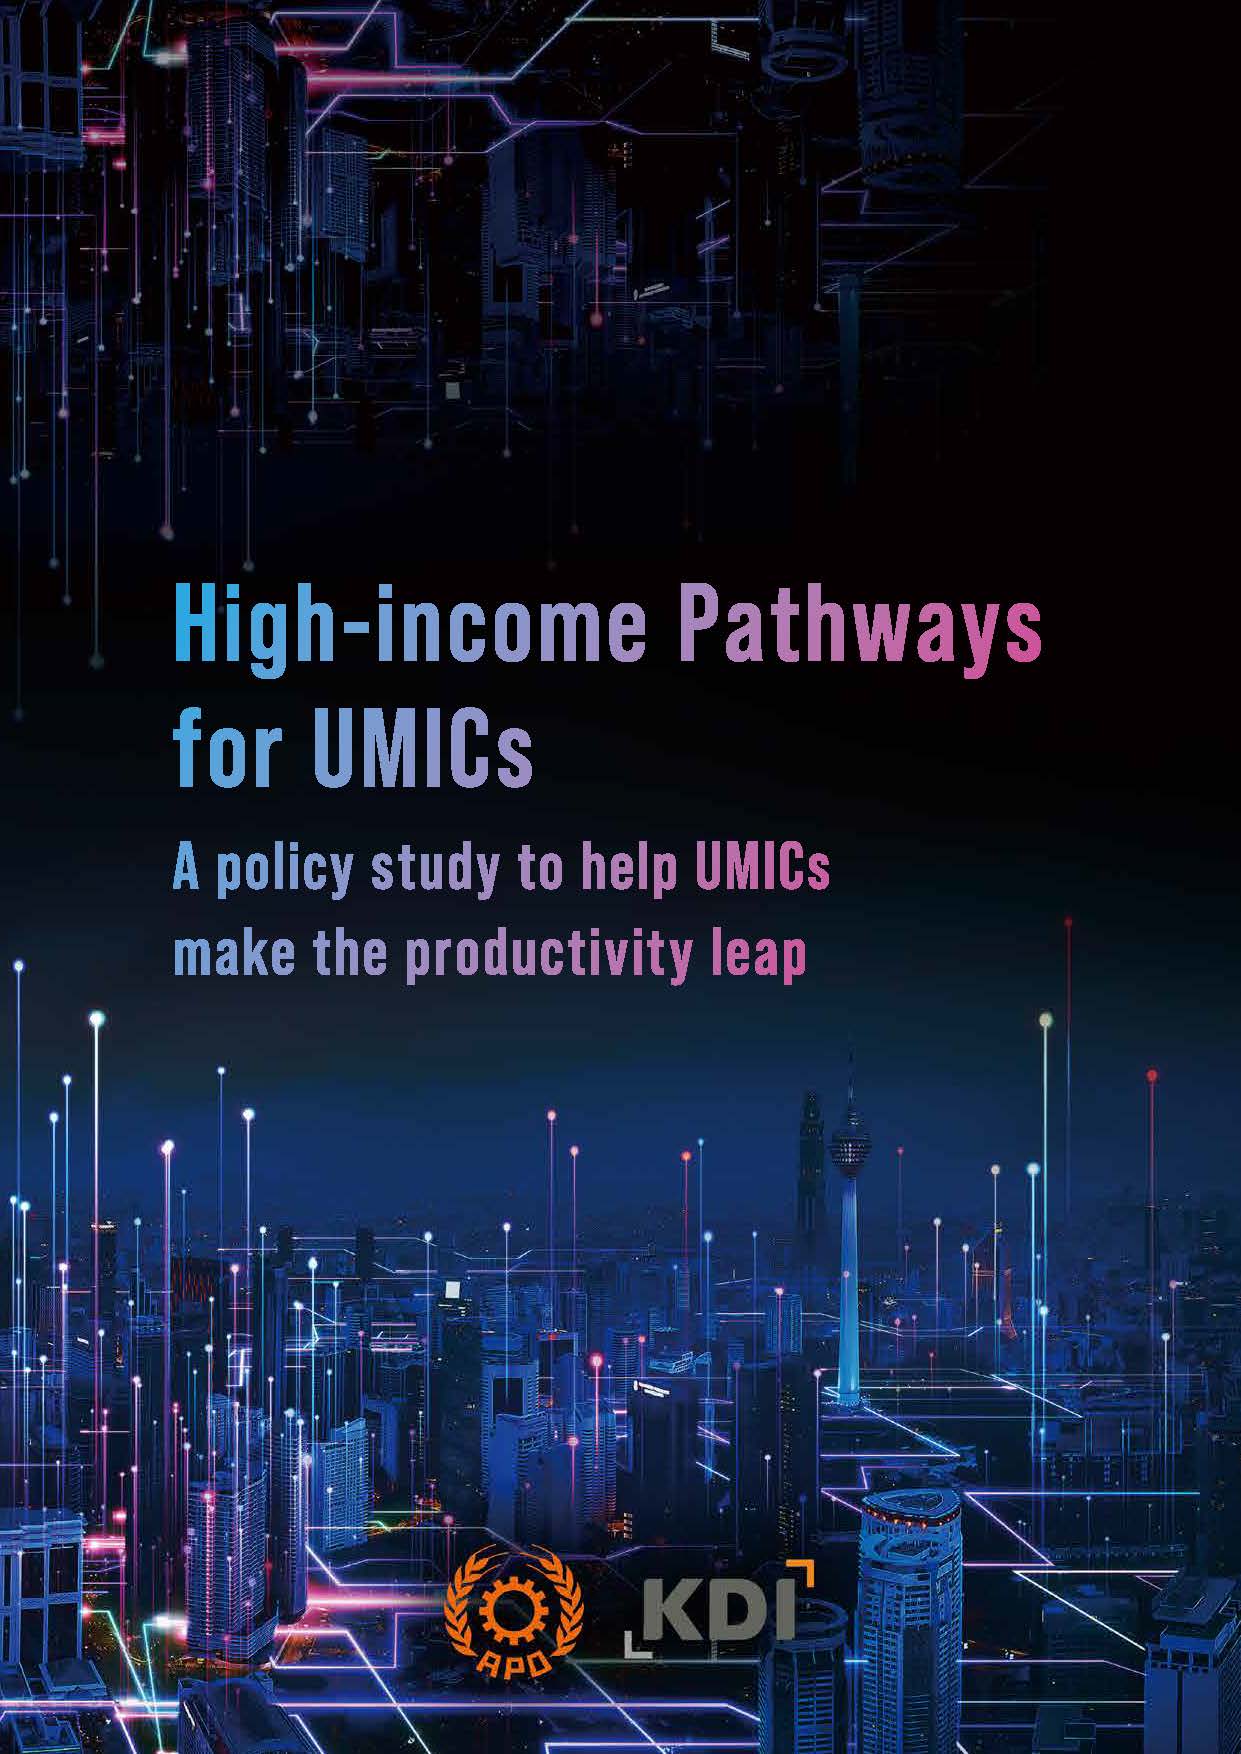 High-income Pathways for UMICs: A policy study to help UMICs make the productivity leap